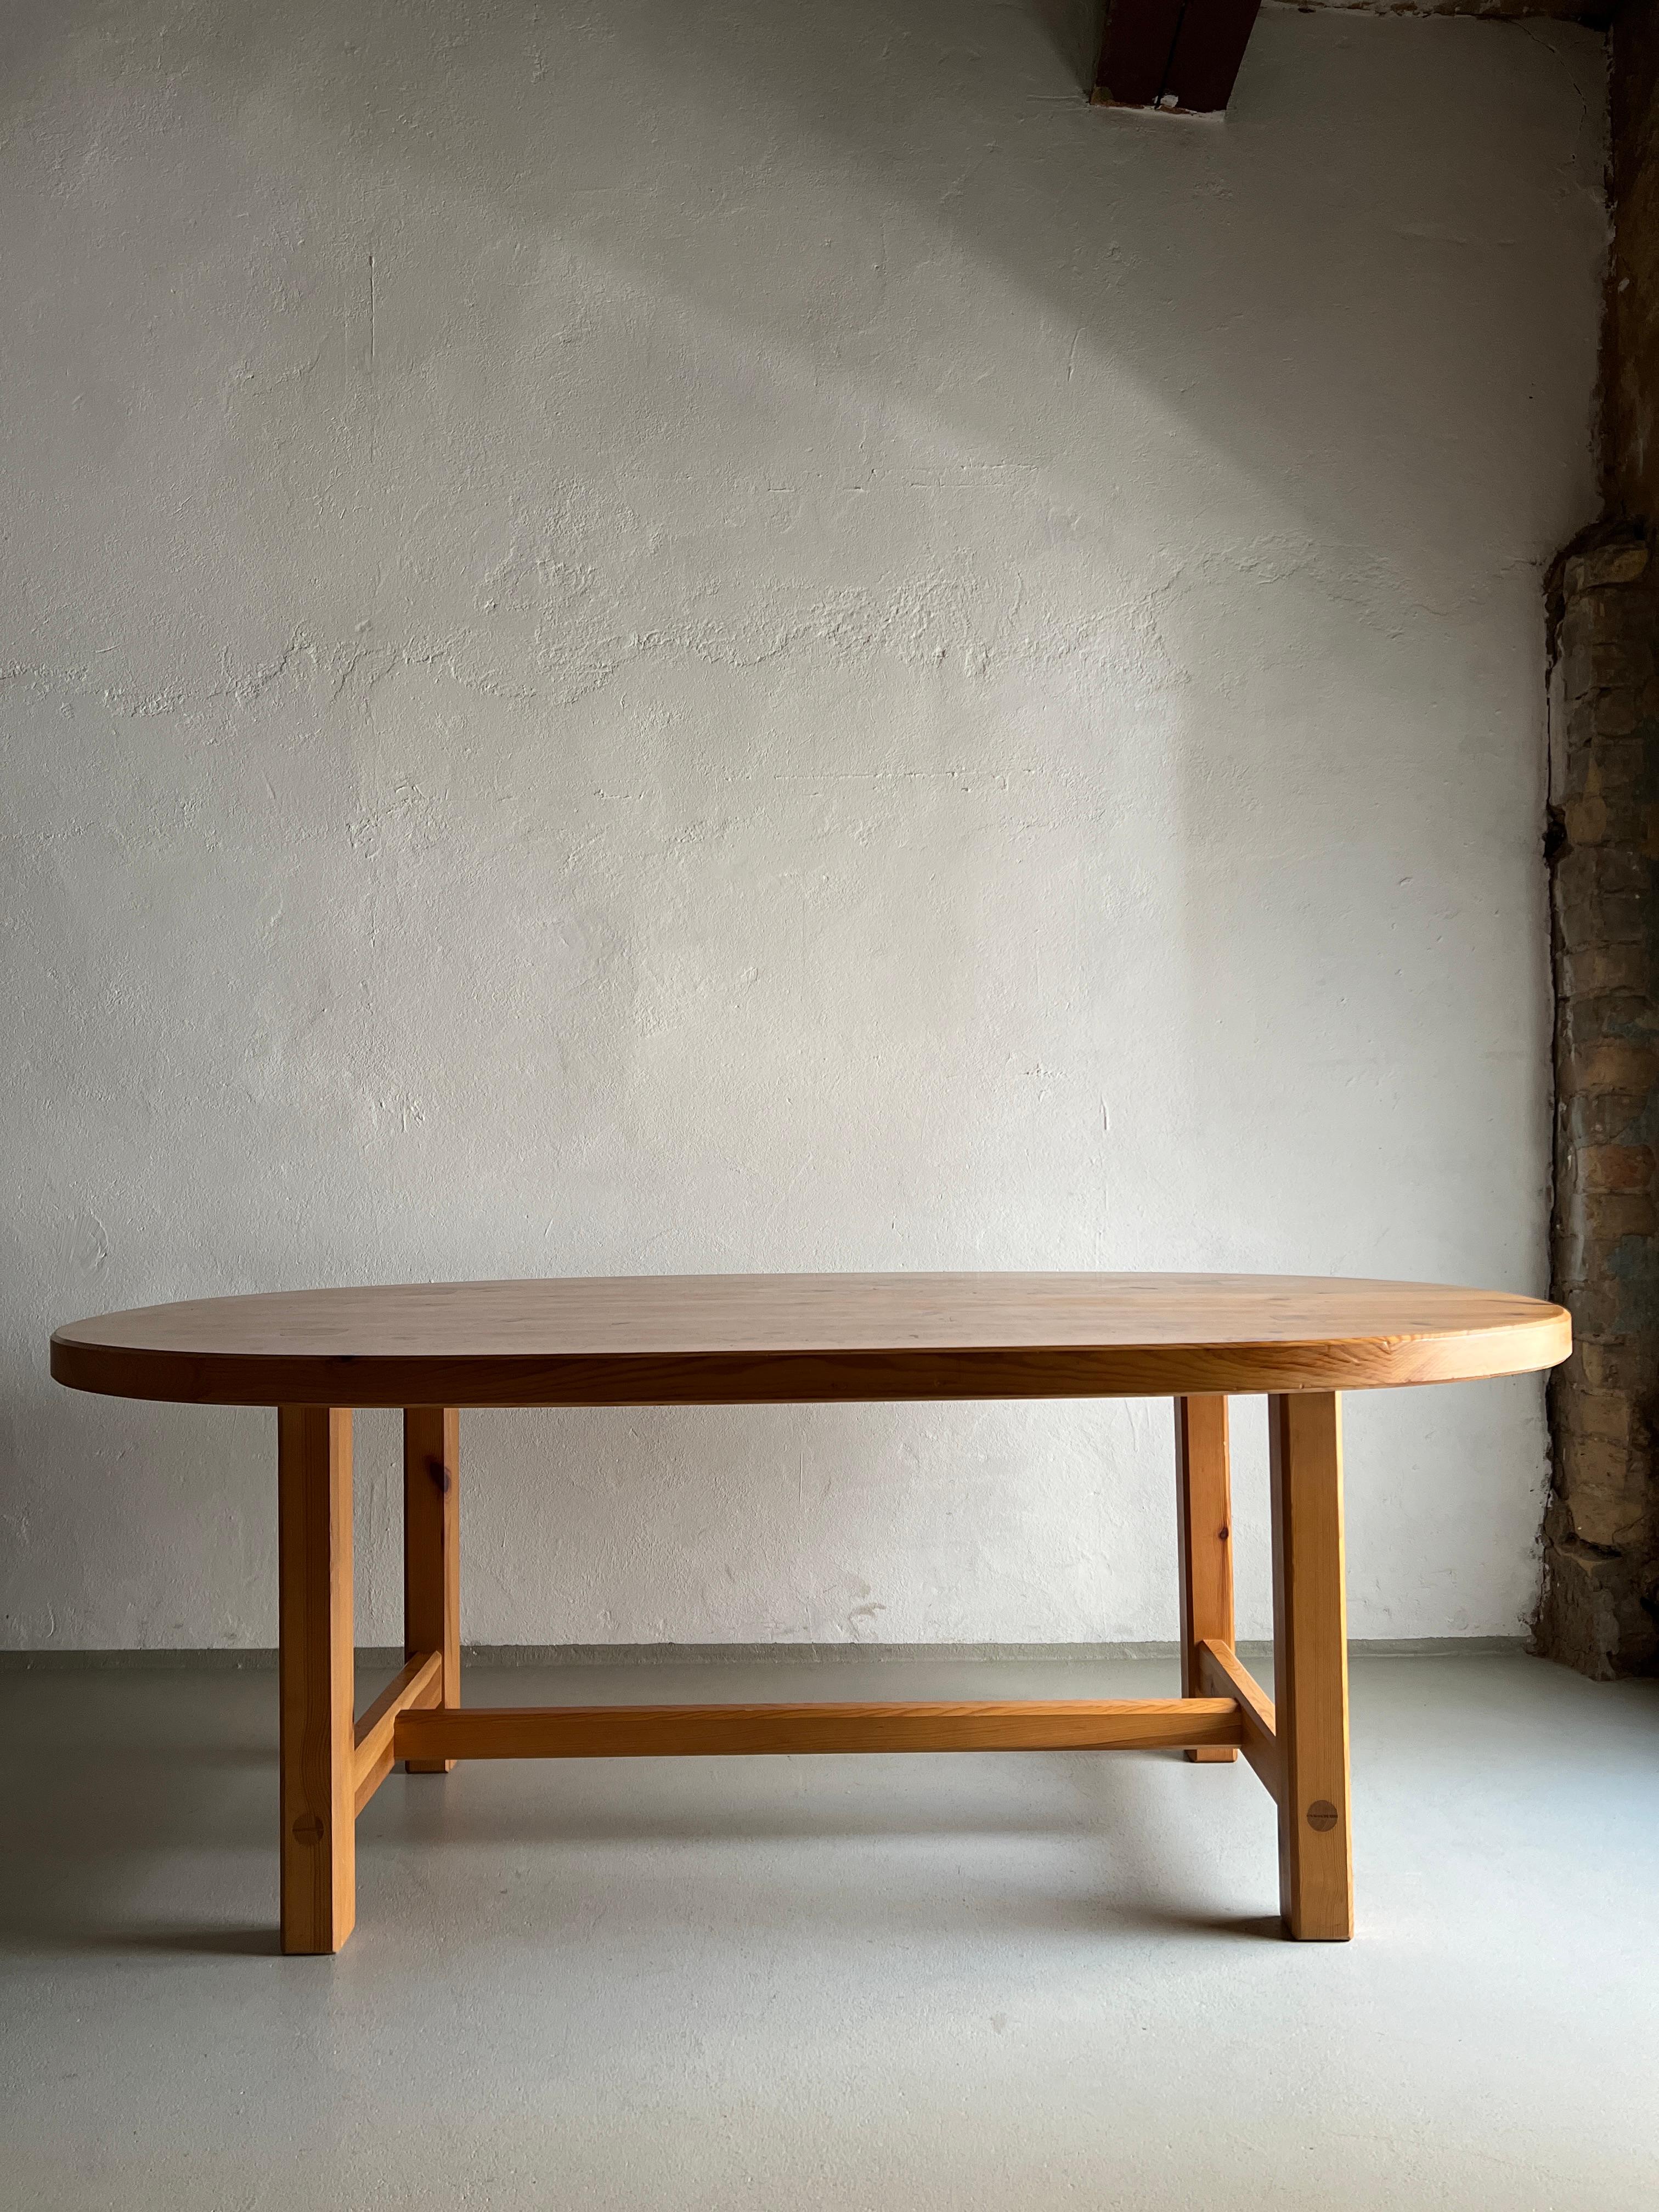 Solid pine oval dining table designed by Roland Wilhelmsson in the 1970s.

Additional information:
Manufacturer: AB Karl Andersson & Söner, Sweden
Period: 1970s
Dimensions: H(table/tabletop): 70.5/6 cm, W: 190 cm, D: 110.5 cm
Condition: Good vintage